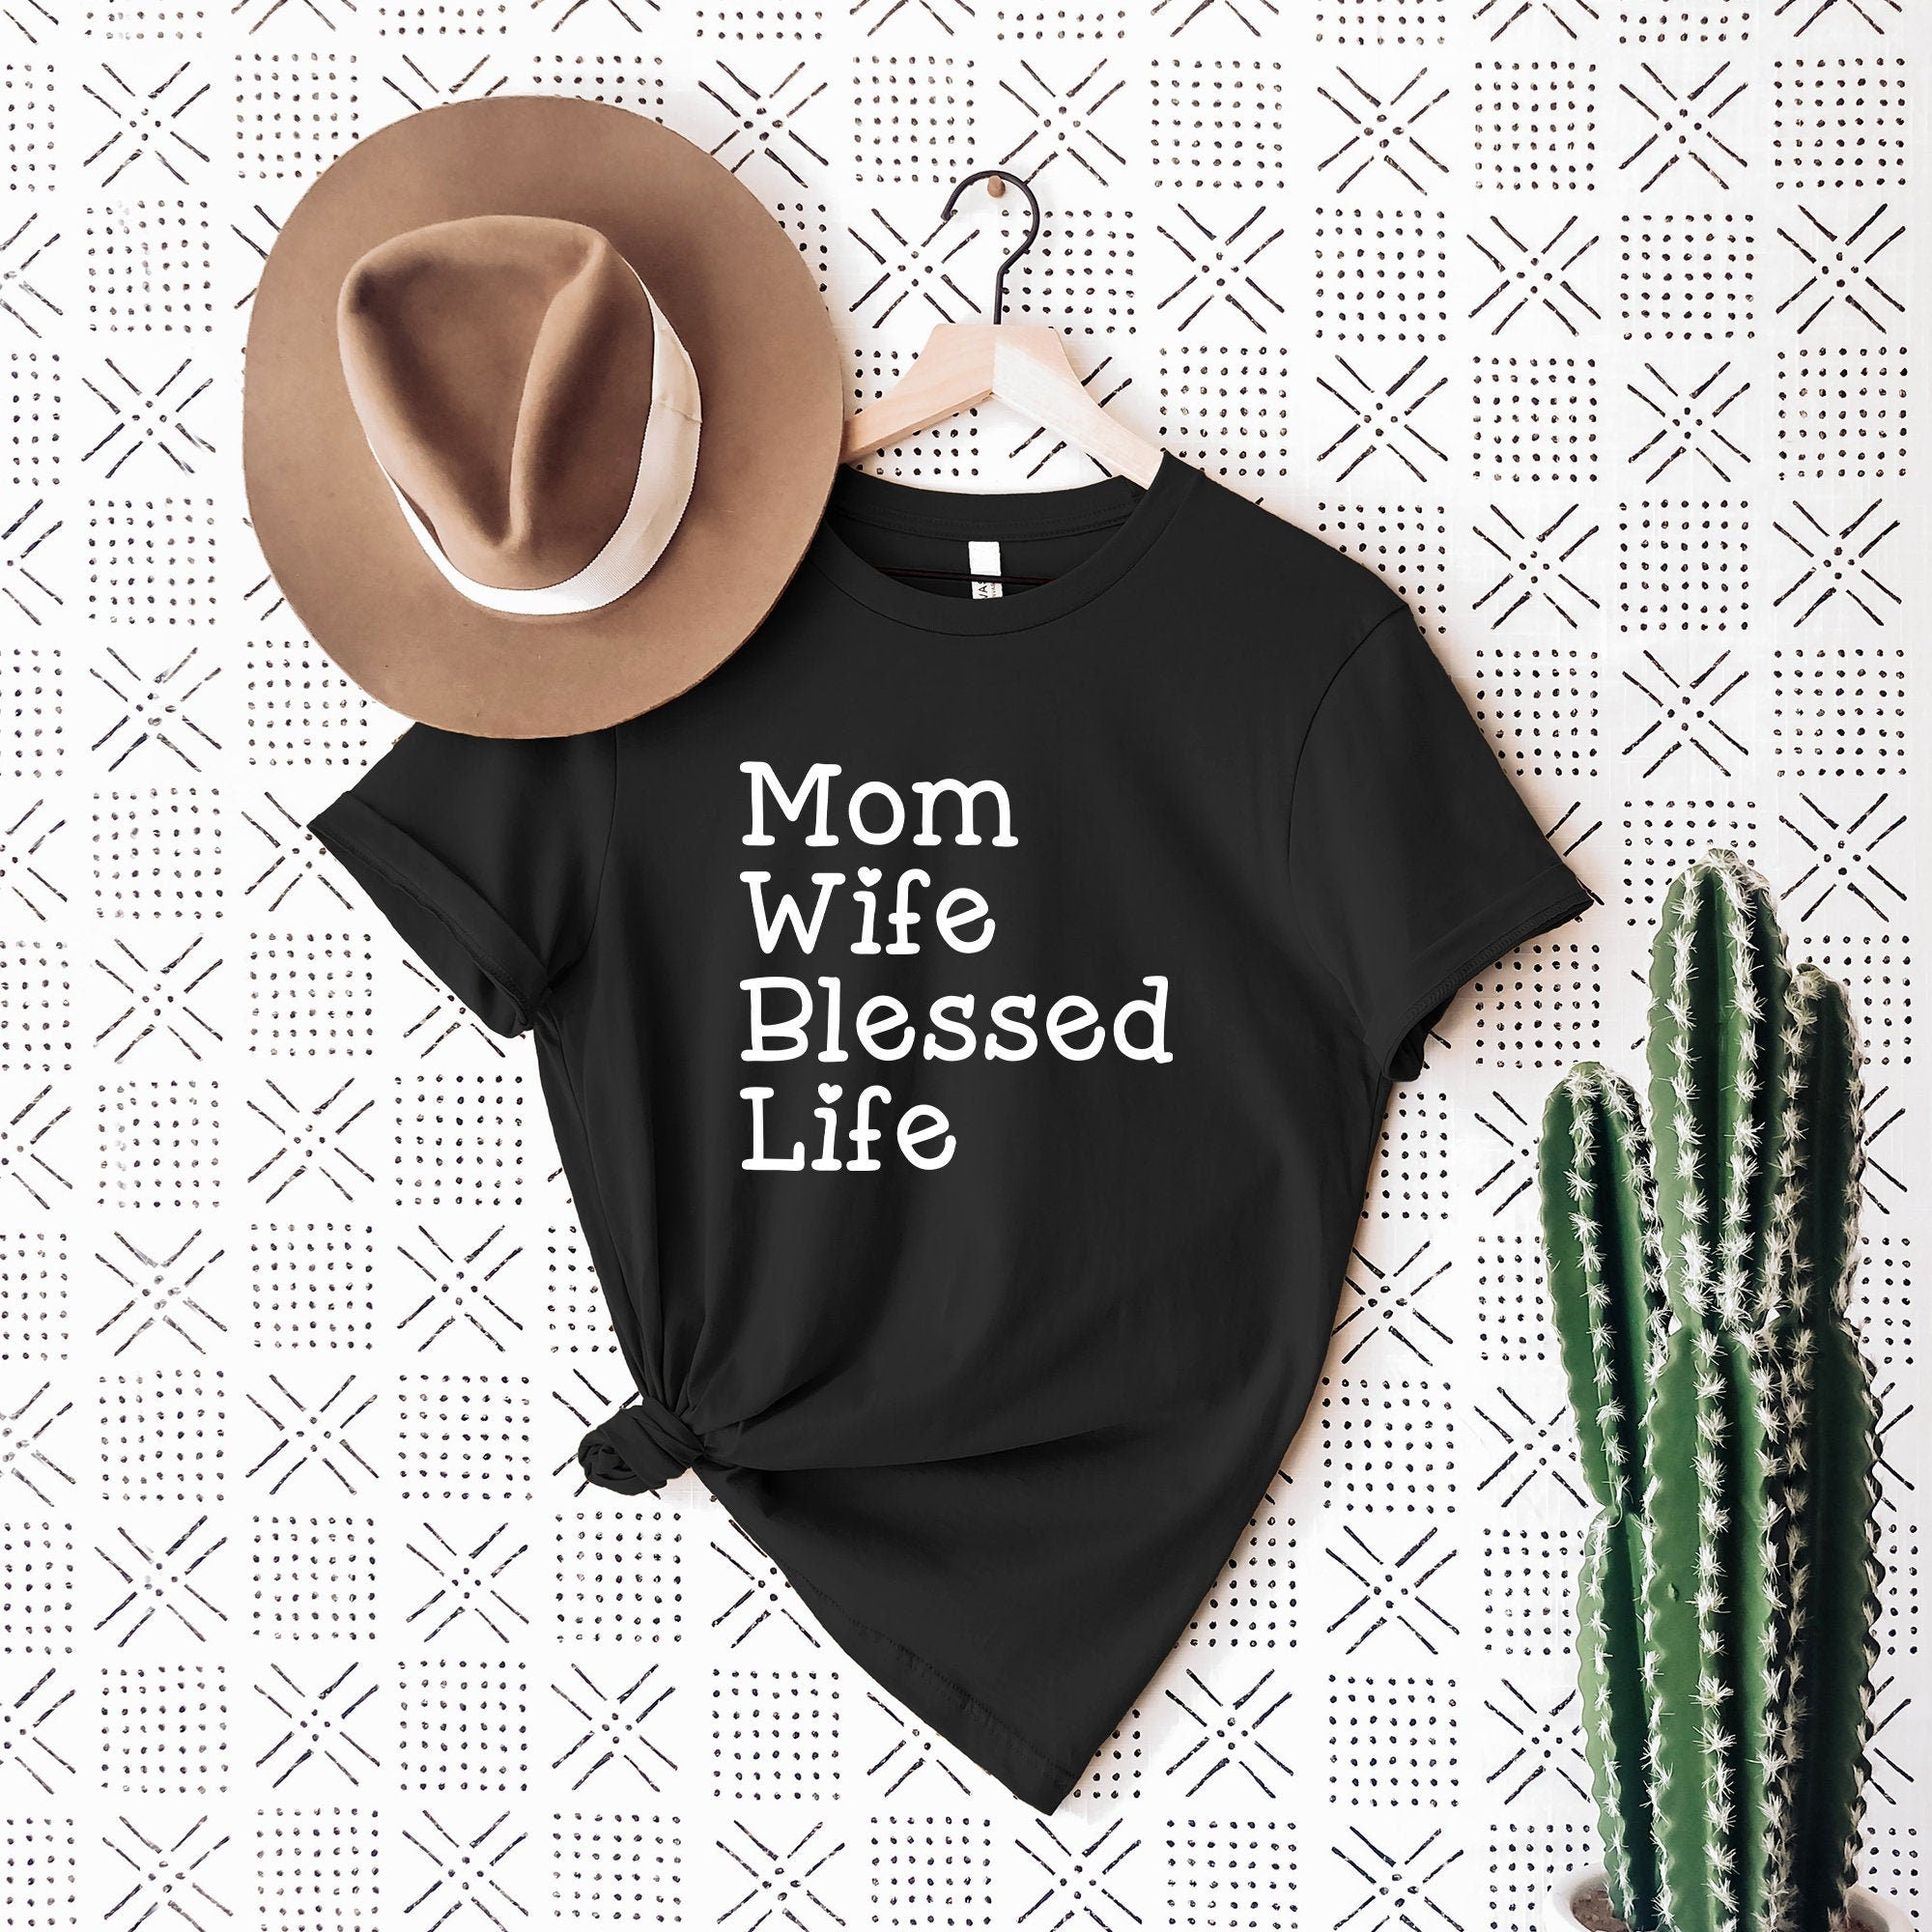 Mom Wife Blessed Life, Gifts for Mom, Mom Shirts, Mom-life Shirt, Shirts for Moms, Trendy Mom T-Shirts, Cool Mom Shirts, Shirts for Moms